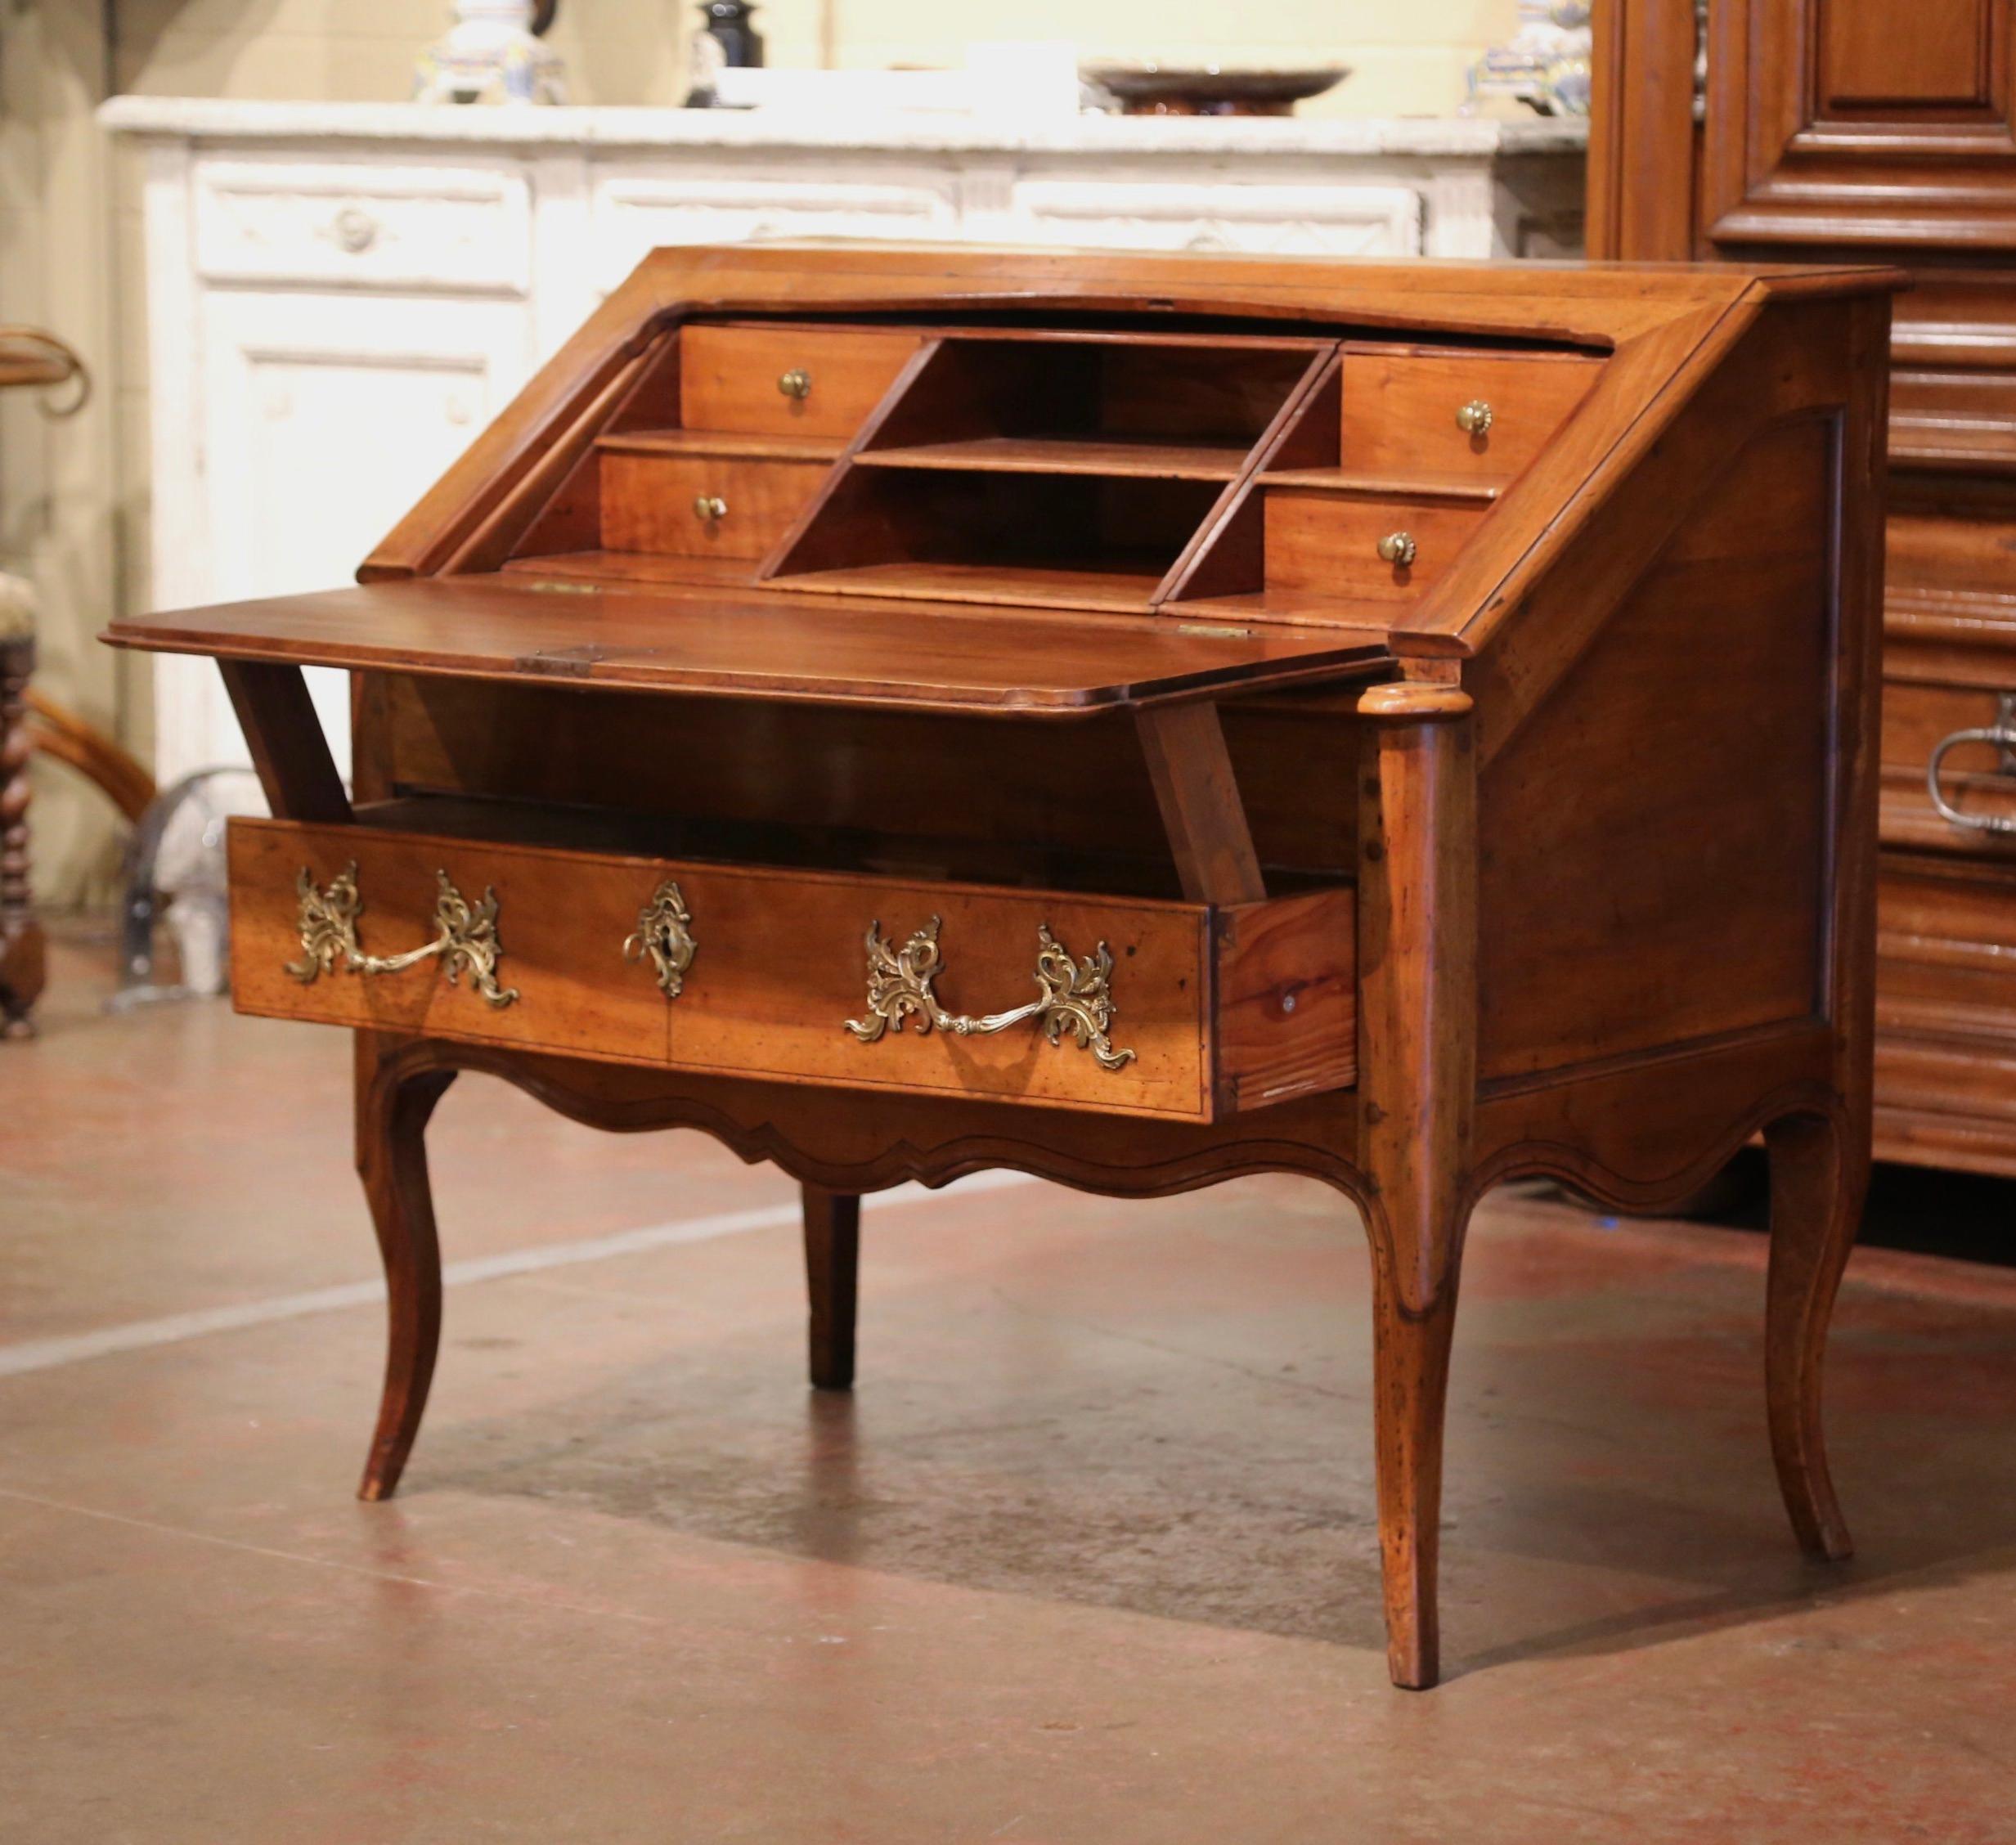 Carved in southern France, circa 1760, the fold out secretary is both stylish and functional; the elegant writing desk crafted from solid walnut, stands on cabriole legs over a scalloped apron and dressed with bombe drawer across the front